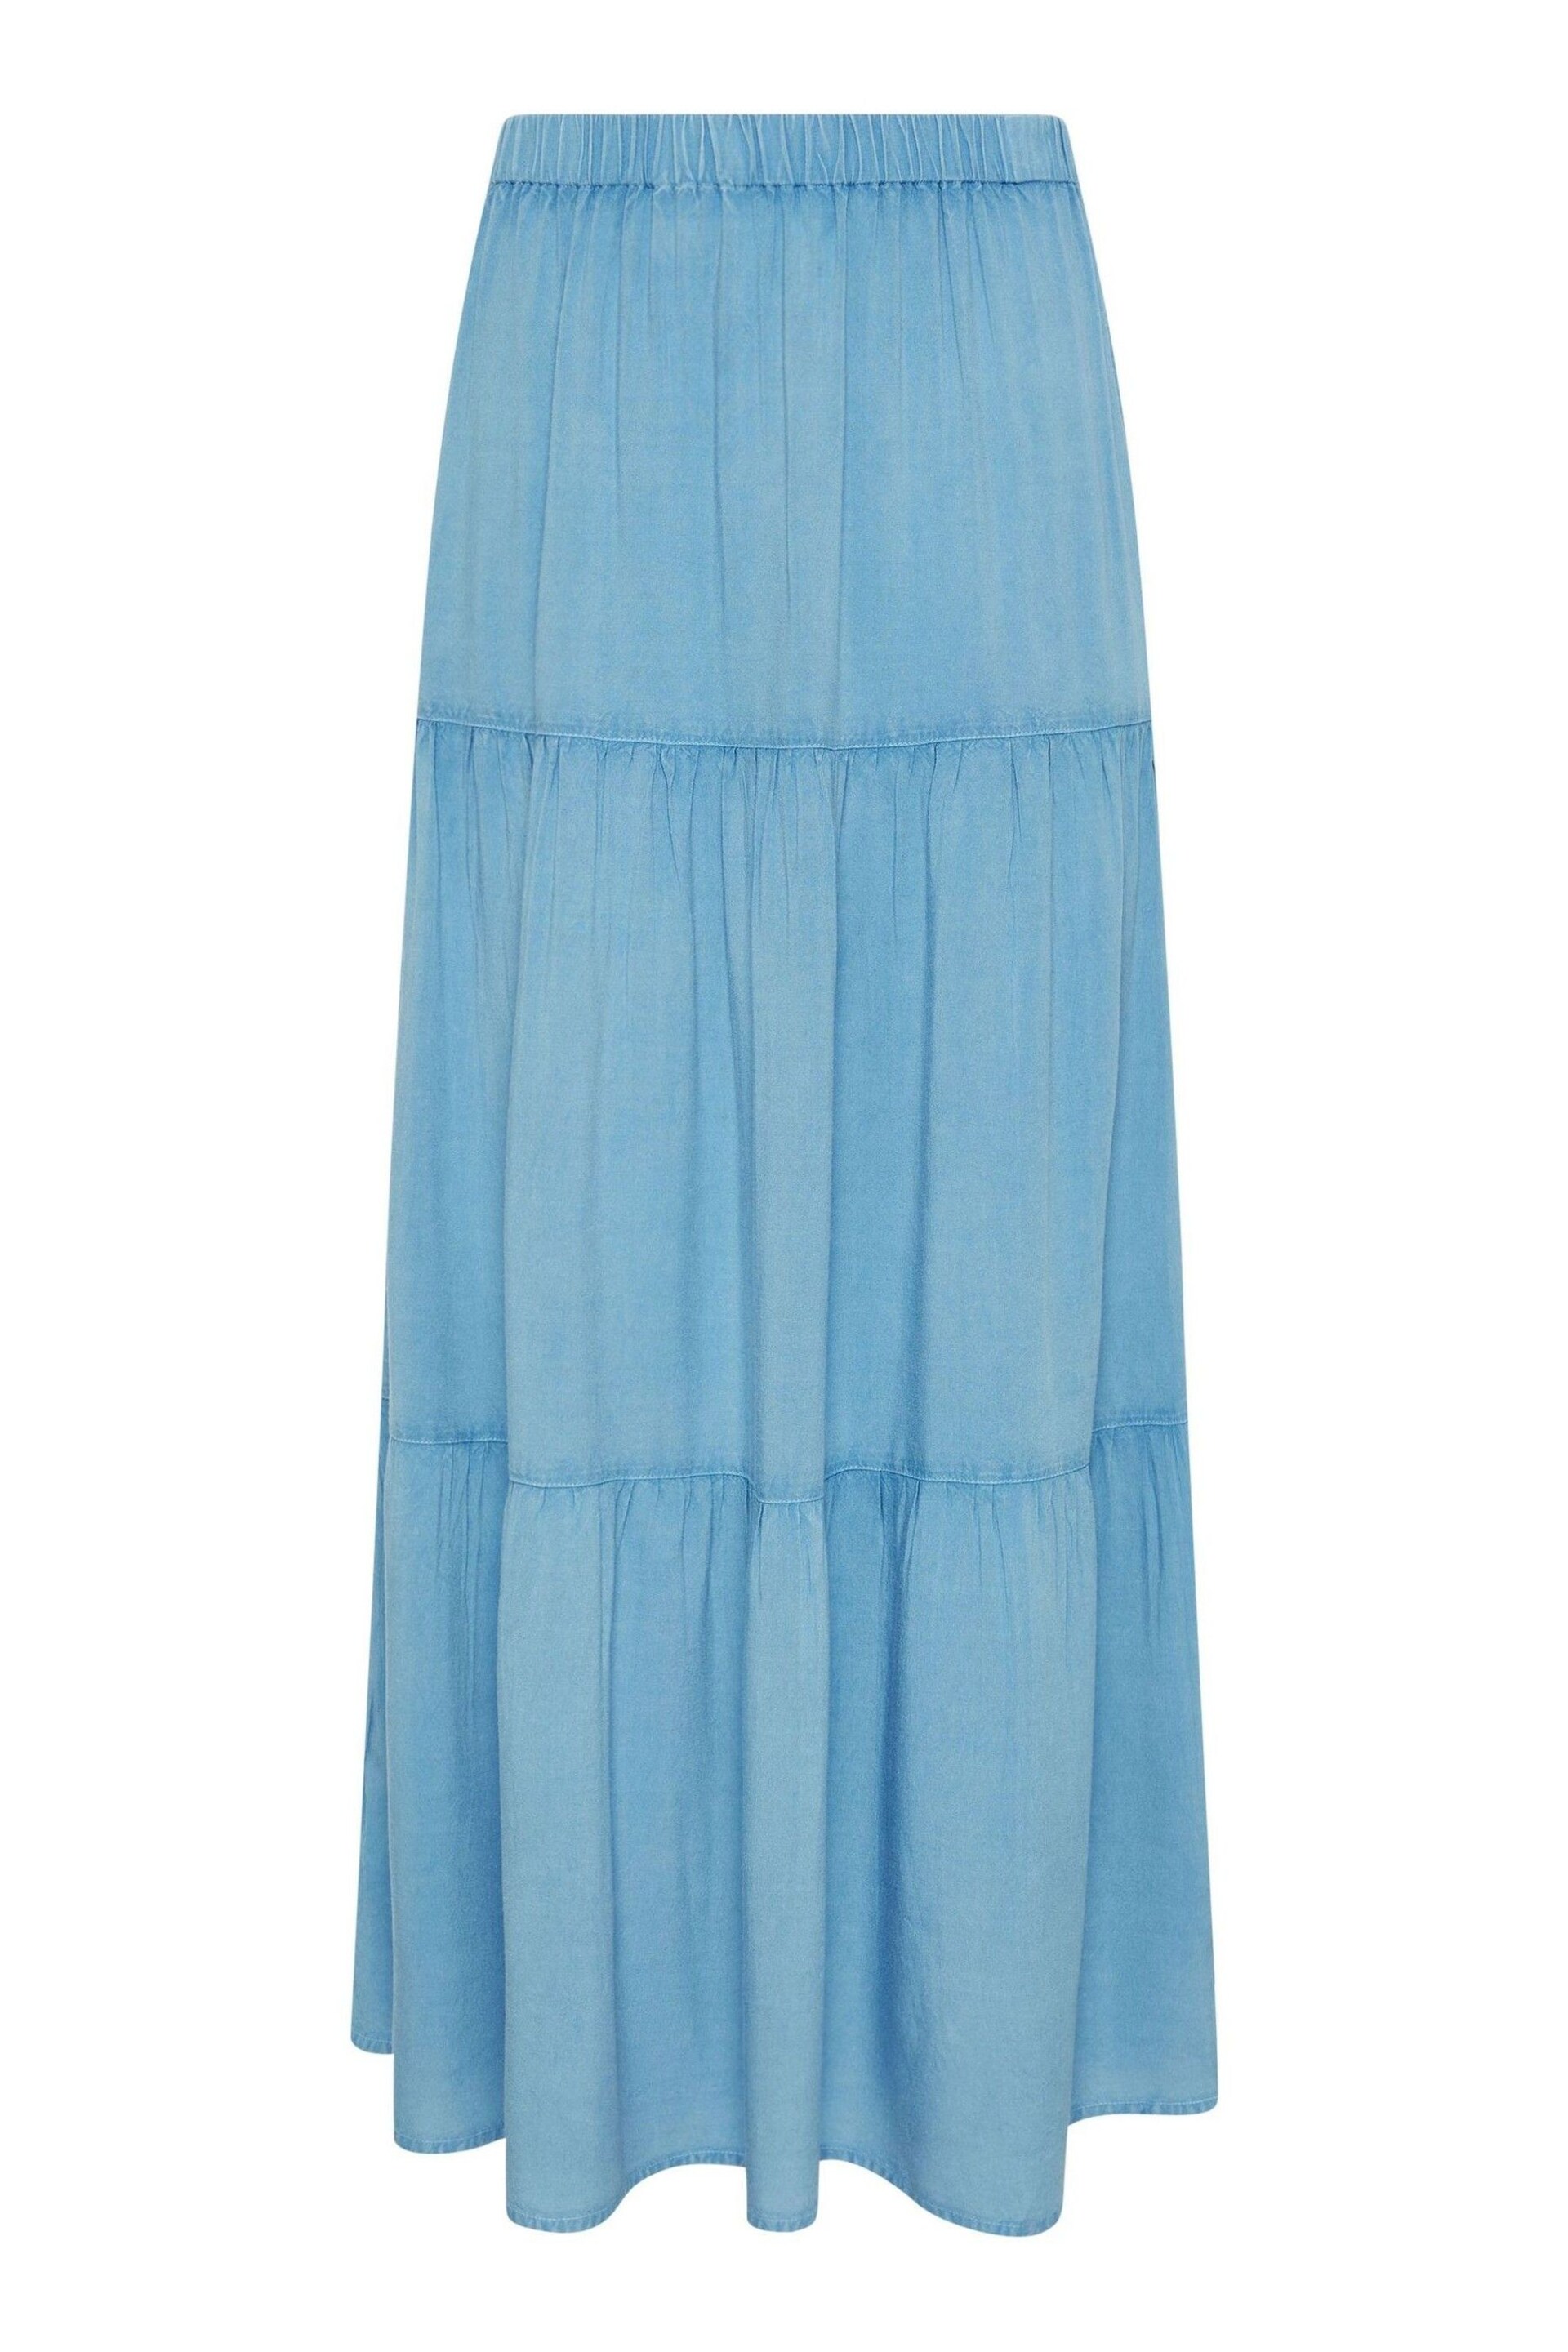 PixieGirl Petite Blue Chambray Tiered Maxi Skirt - Image 4 of 4